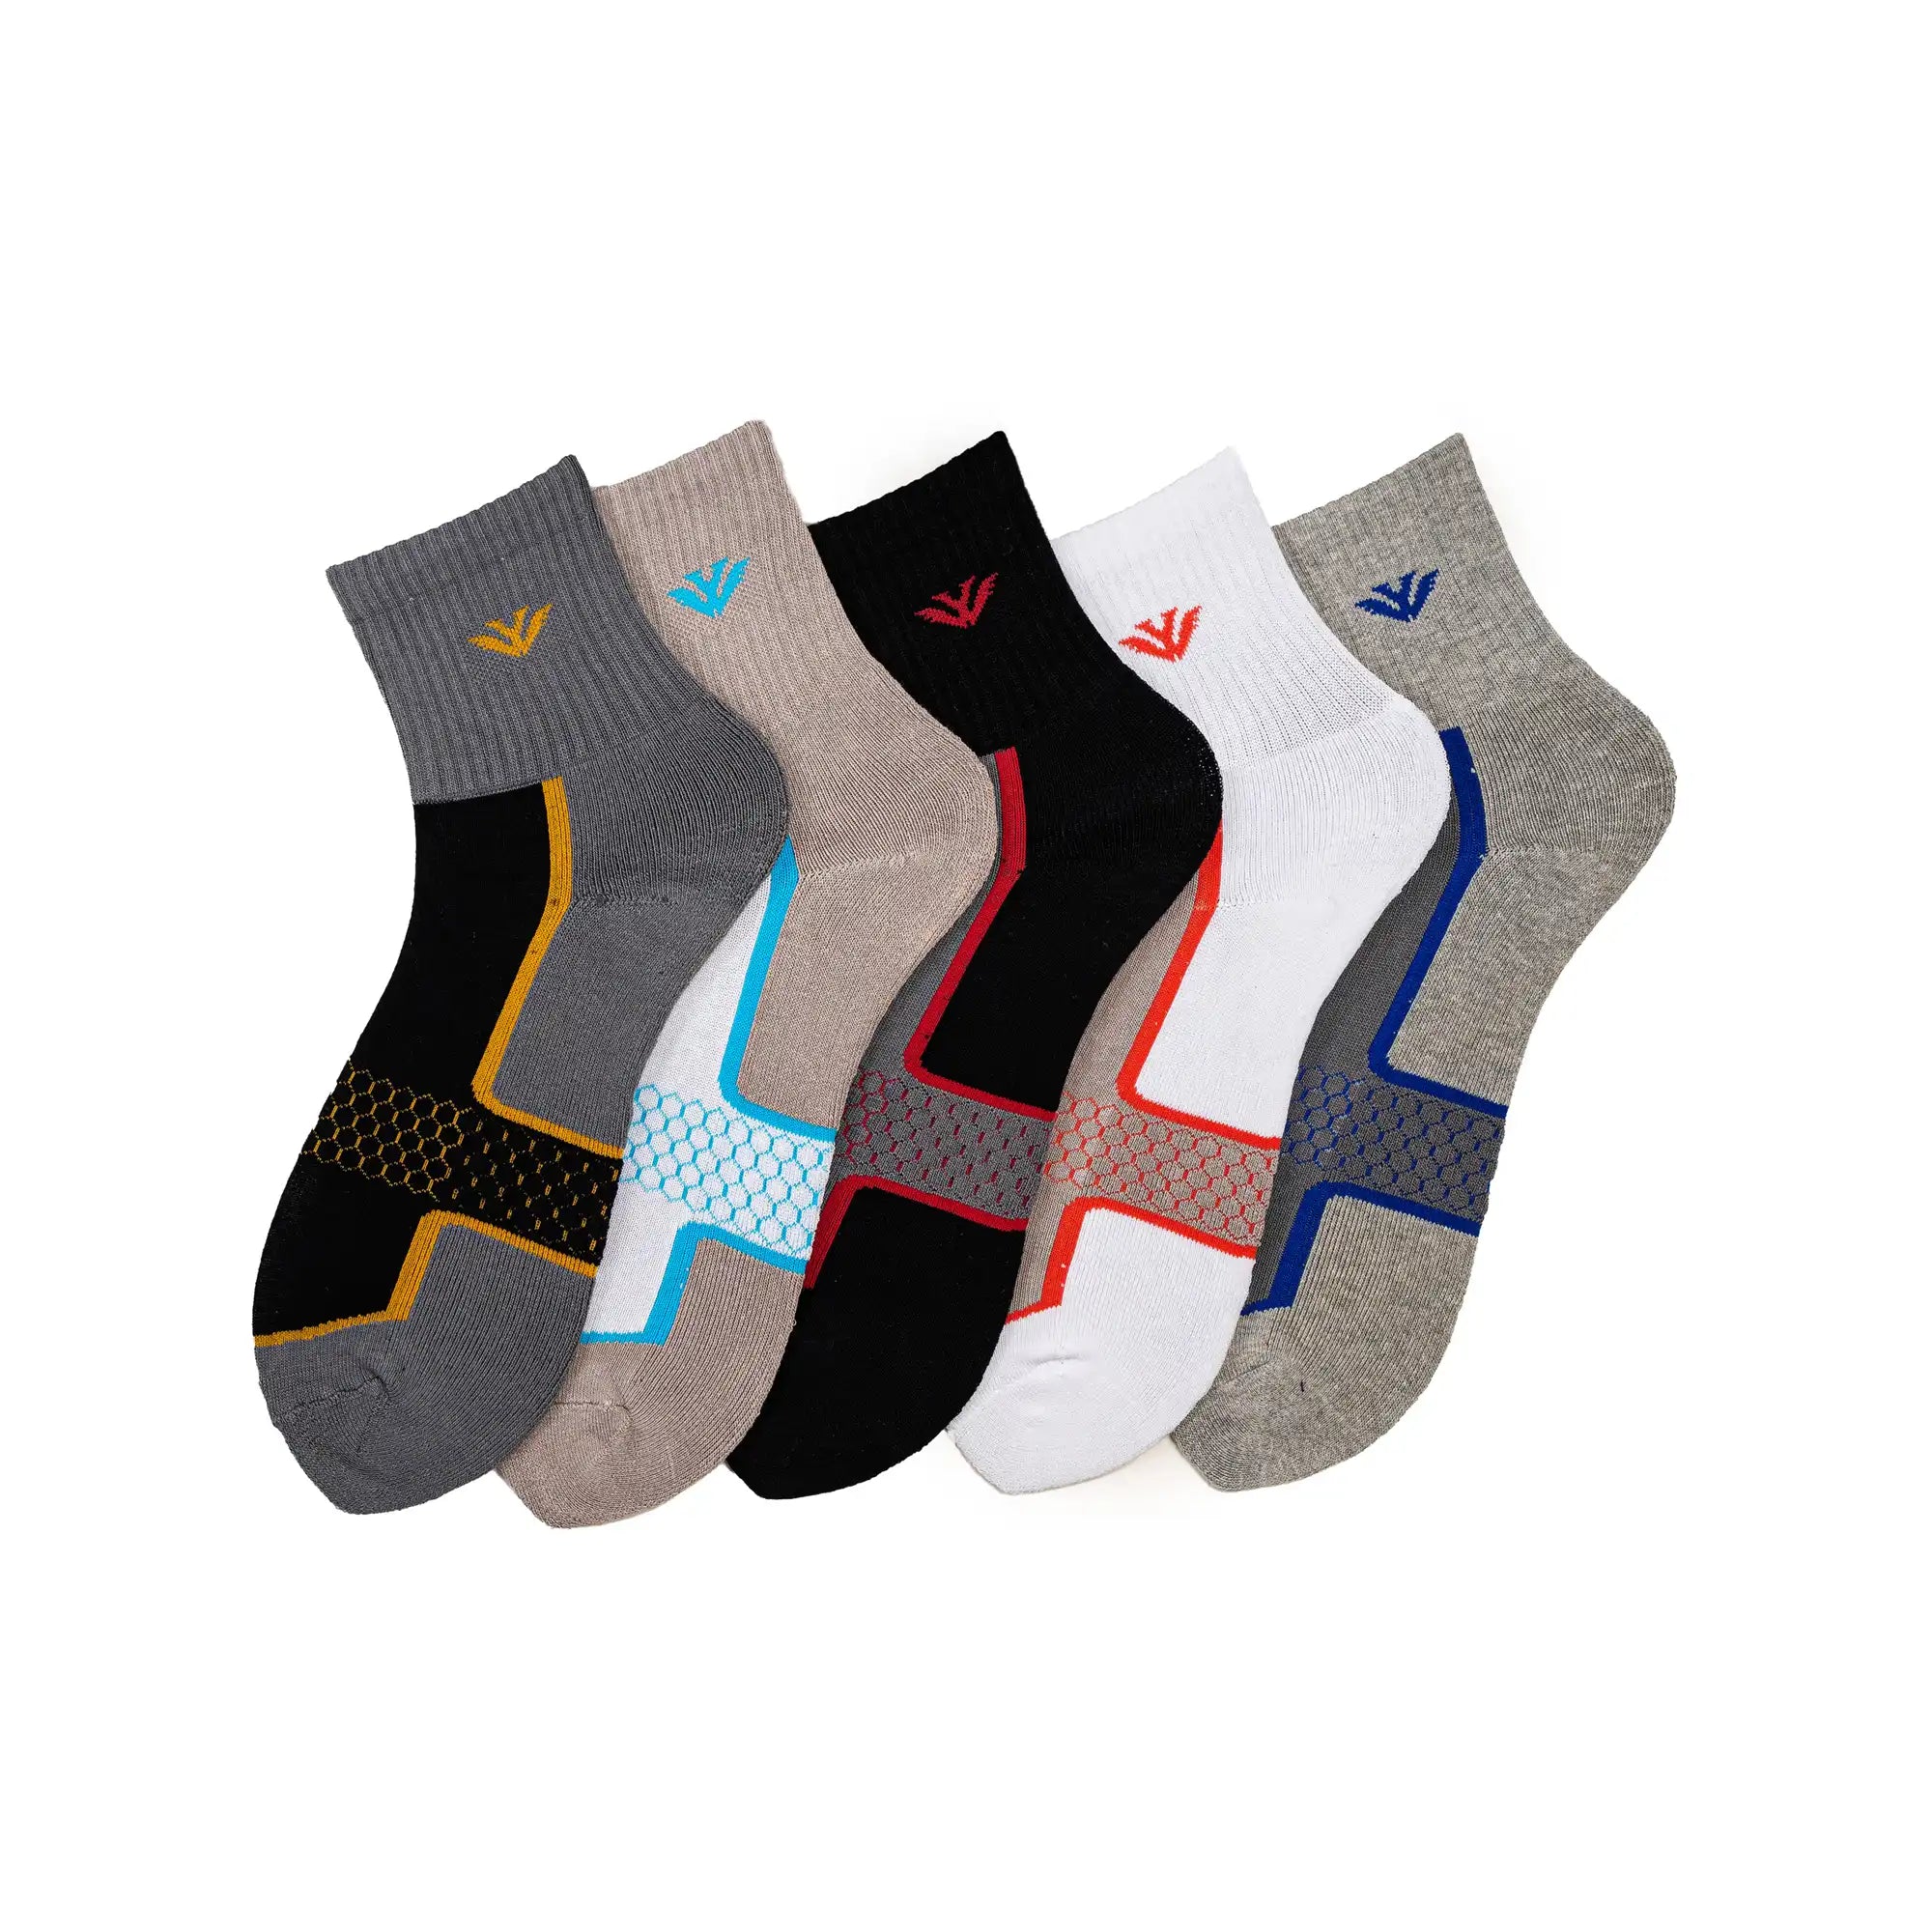 Young Wings Men's Multi Colour Cotton Fabric Design Ankle Length Socks - Pack of 3, Style no. M1-2122